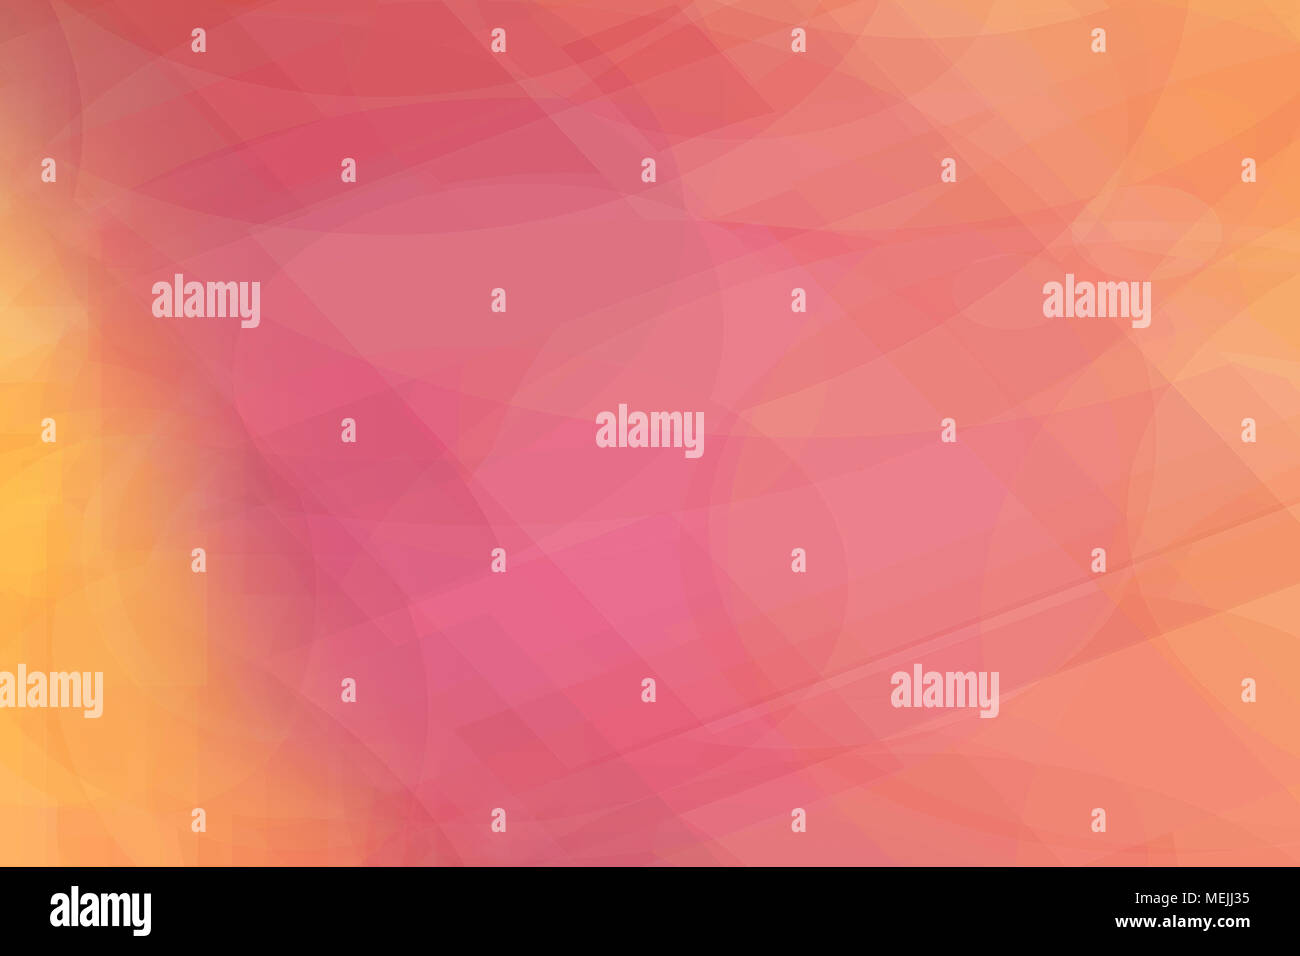 Abstract pink and yellow background image with lines and curves Stock Photo